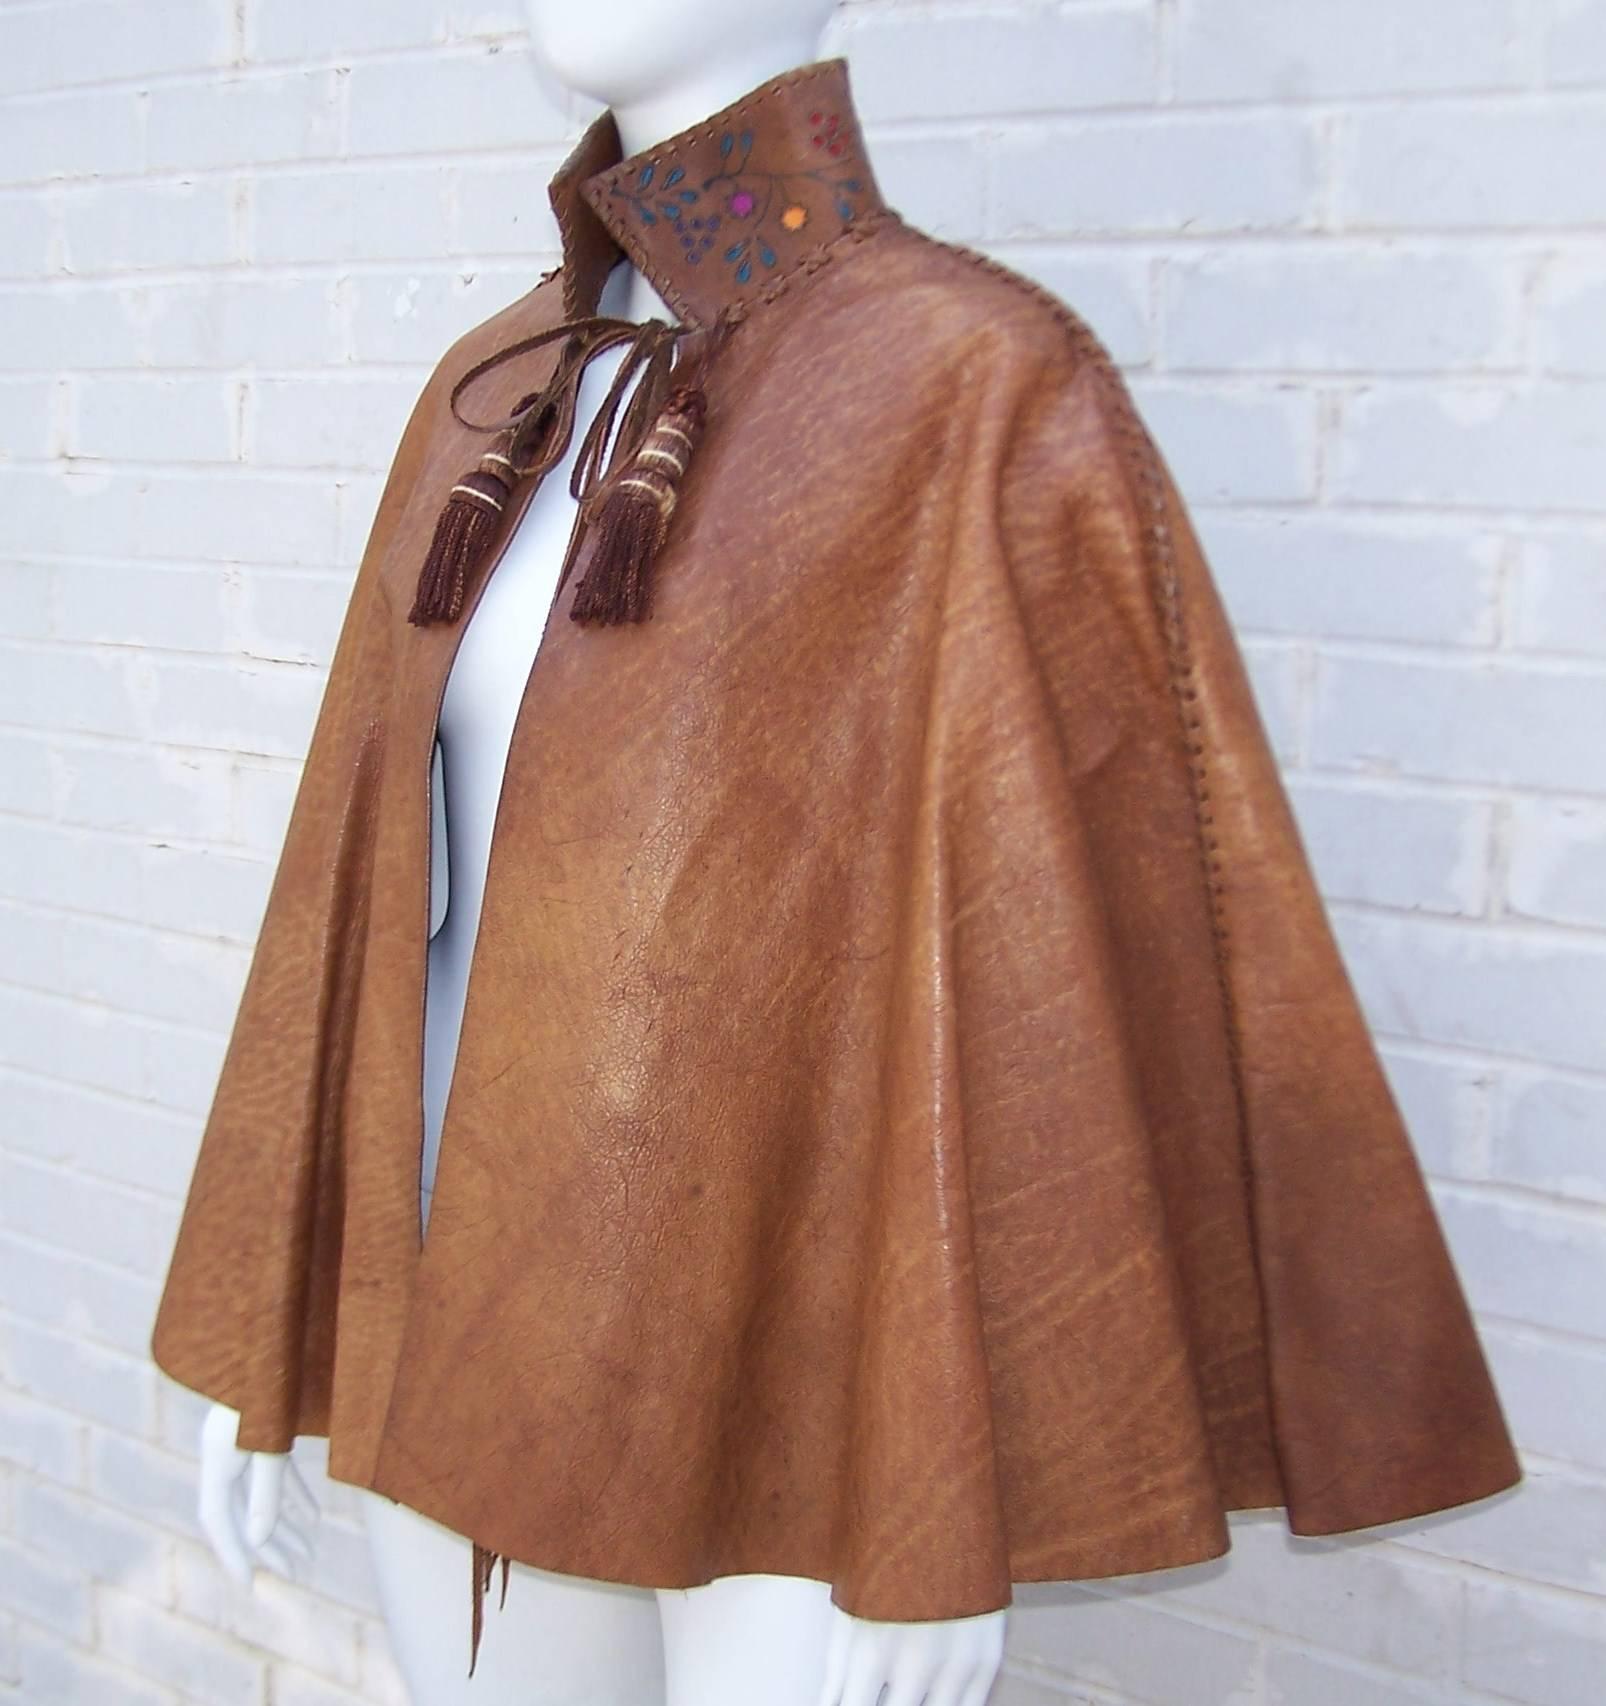 Fred Leighton, red carpet jewelry designer, collaborated with Char in the early 1970s to create this dramatic bohemian leather cape.  The cape is held in place by interior shoulder straps, closes with silk covered wooden tassels and bears colorful